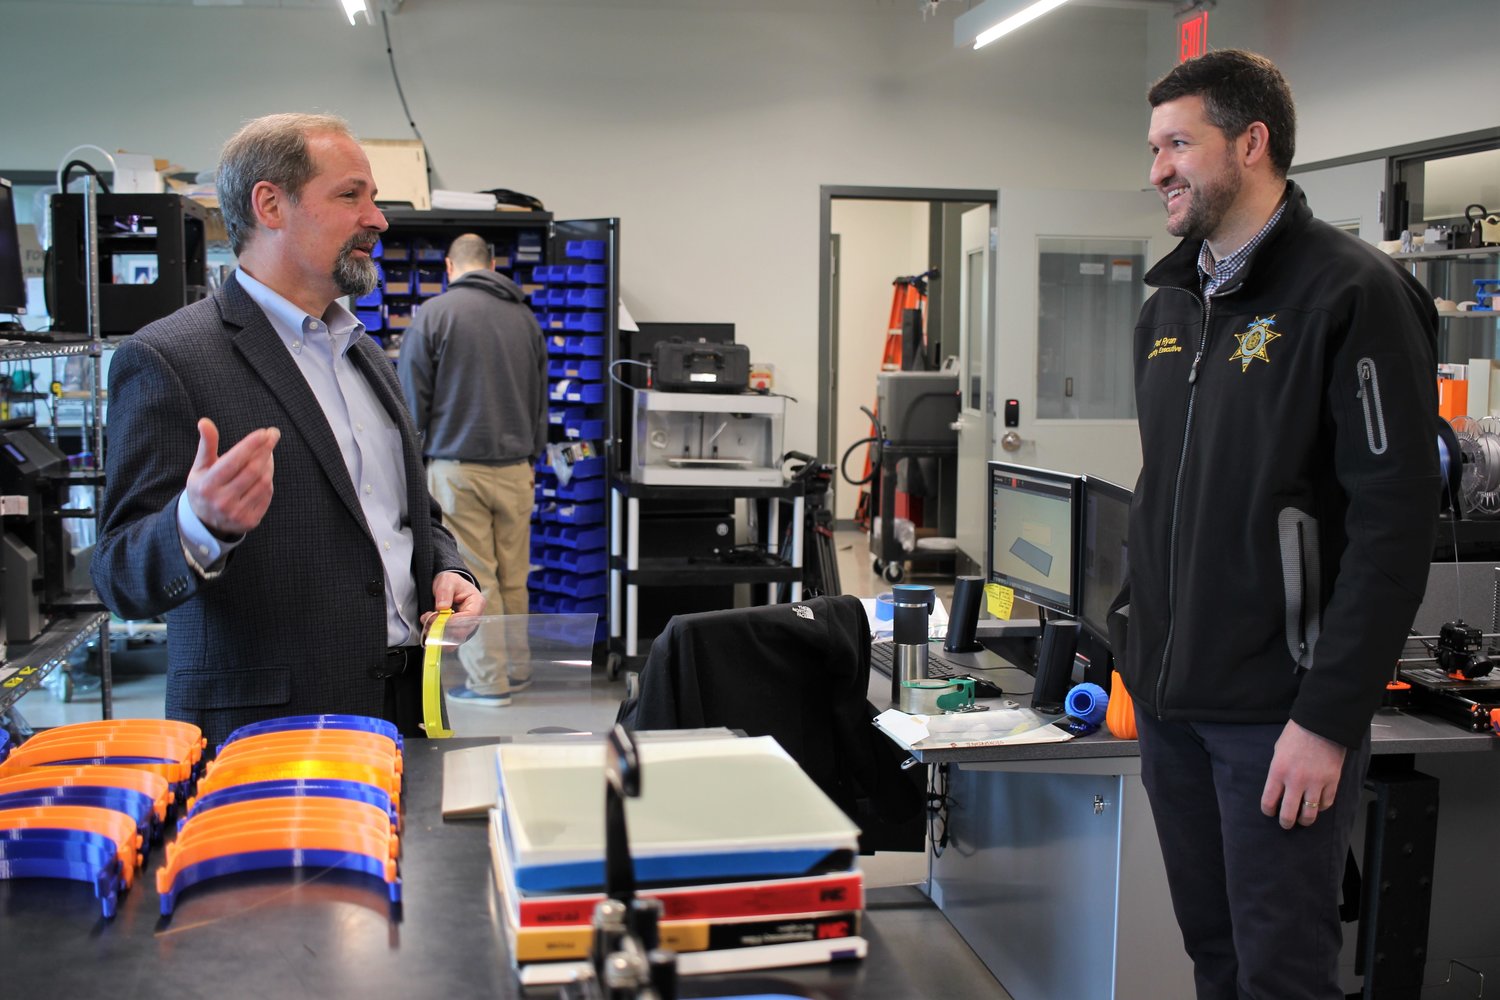 (From left to right) Director of the Hudson Valley Additive Manufacturing Center Dan Freedman and Ulster County Executive Pat Ryan.